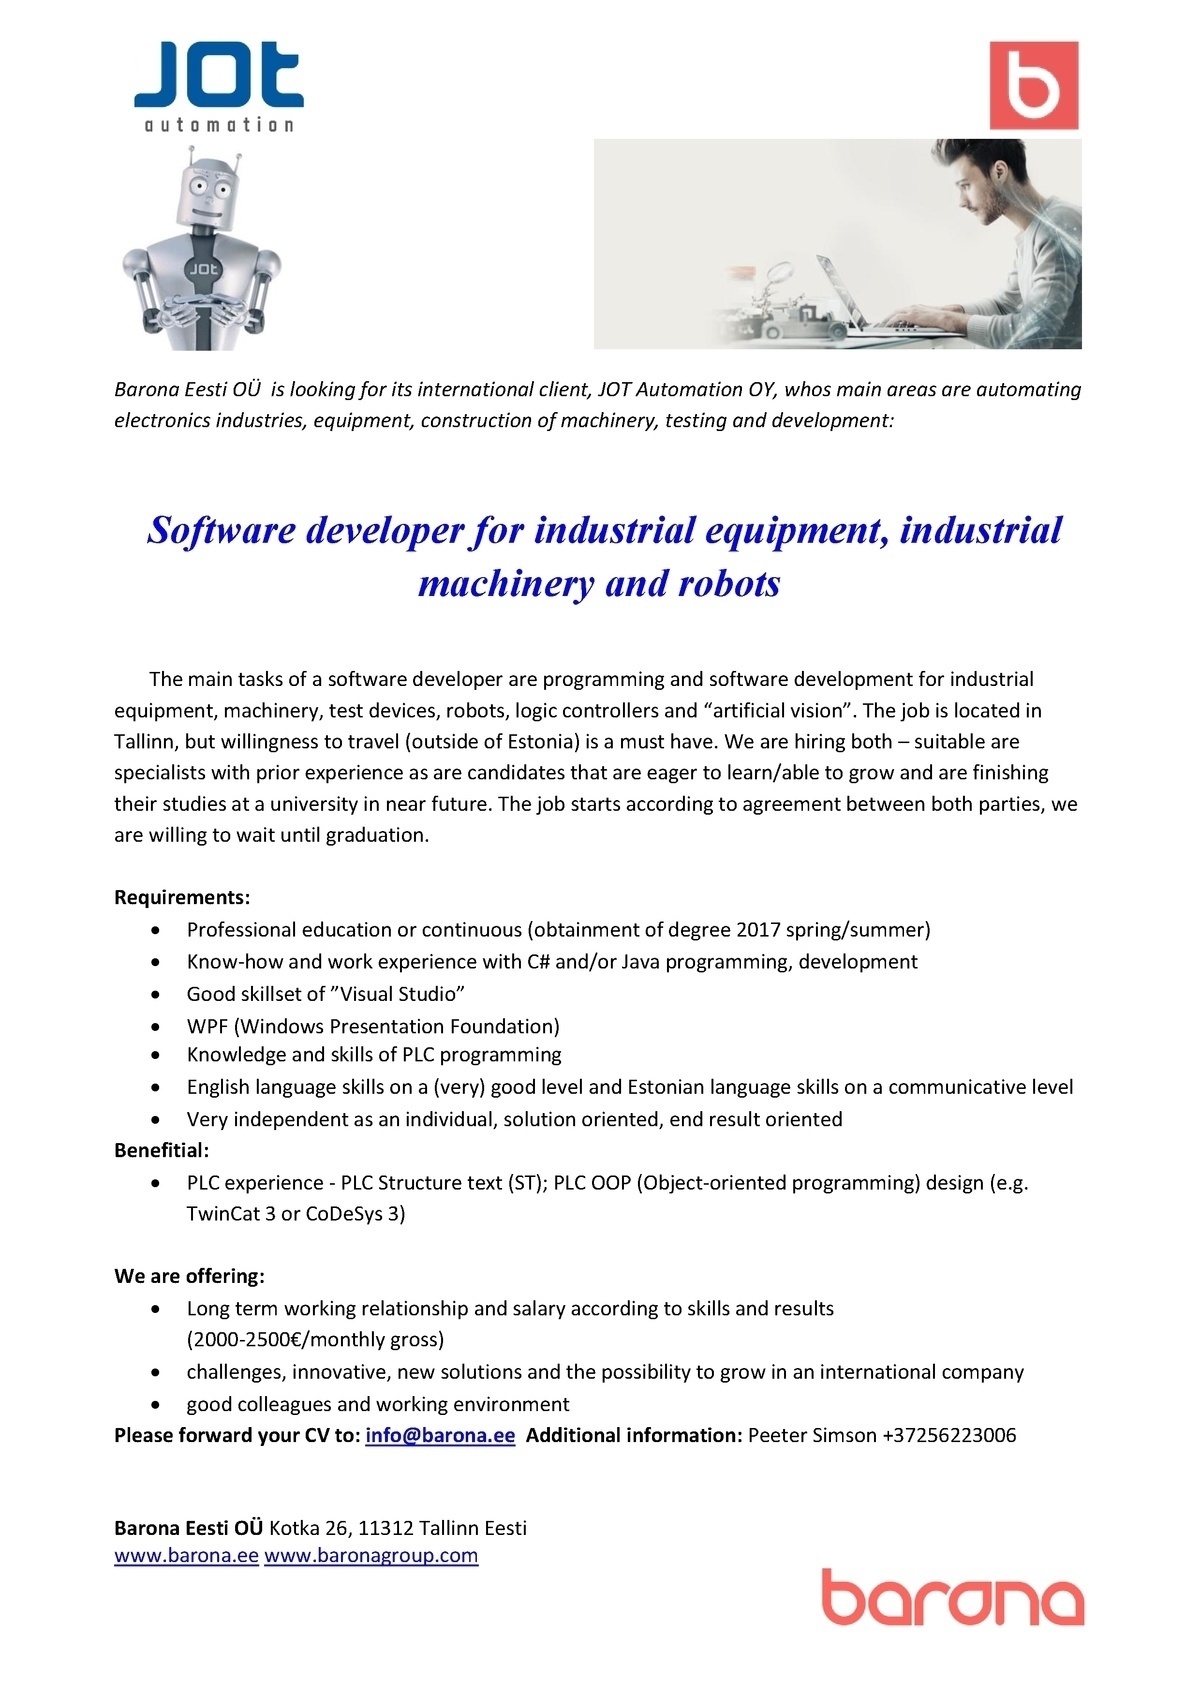 Barona Eesti OÜ  Software developer for industrial equipment, industrial machinery and robots 